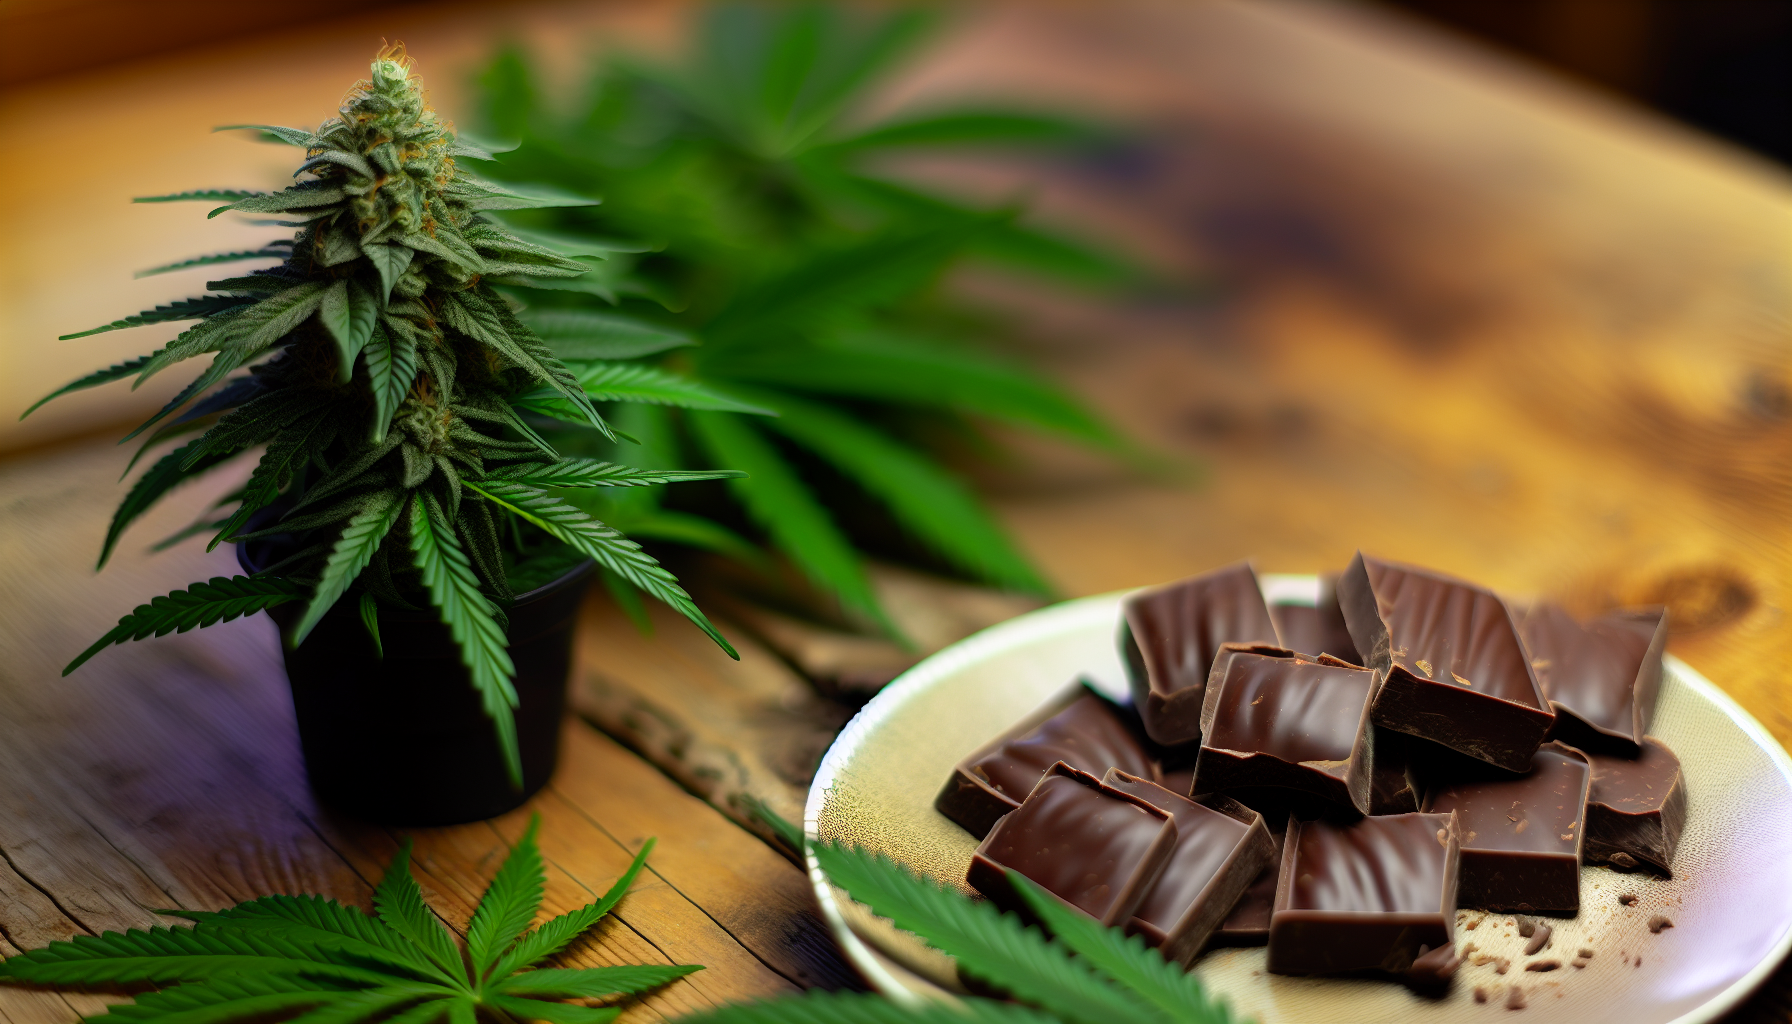 Cannabis plant and cannabis-infused chocolate